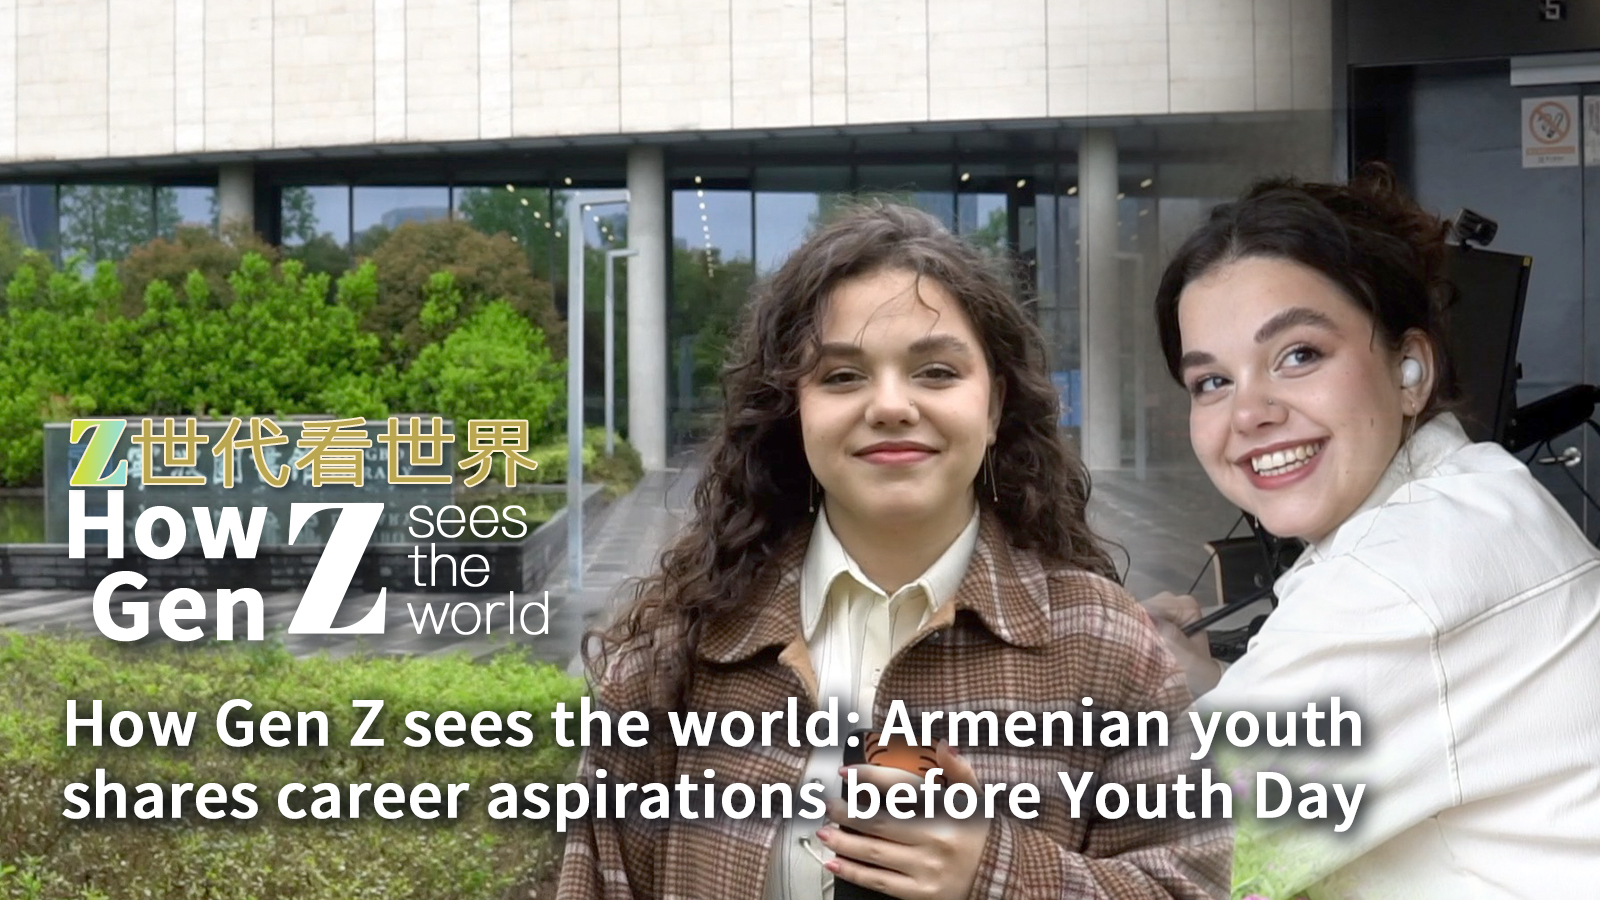 Armenian youth shares career aspirations before Youth Day